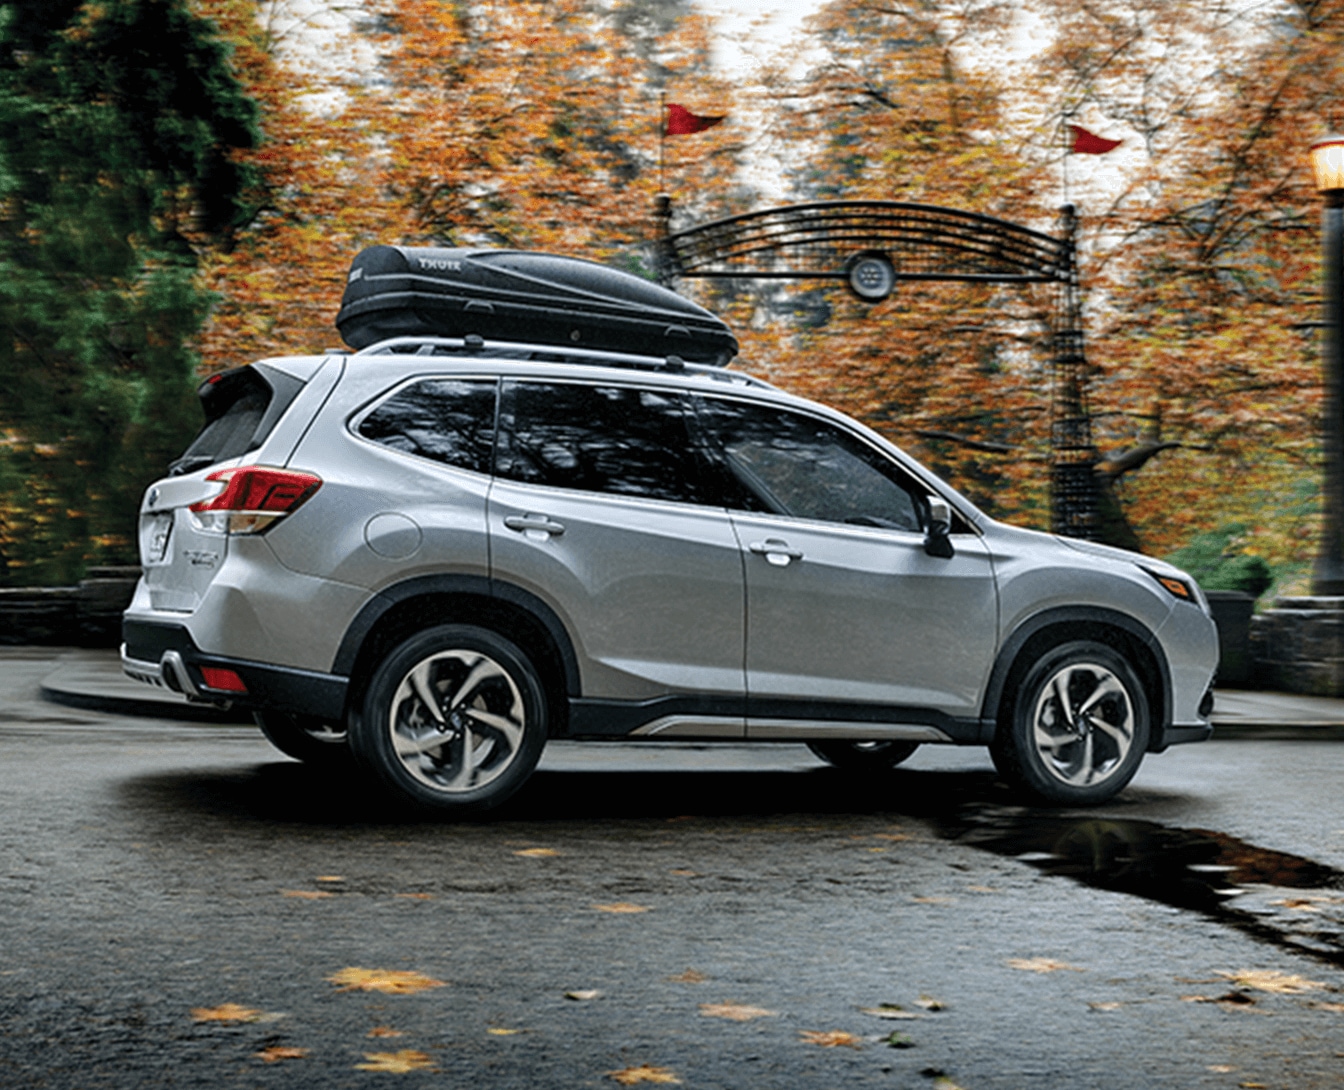 Subaru Forester Towing Capacity How Much Can You Tow By Year?